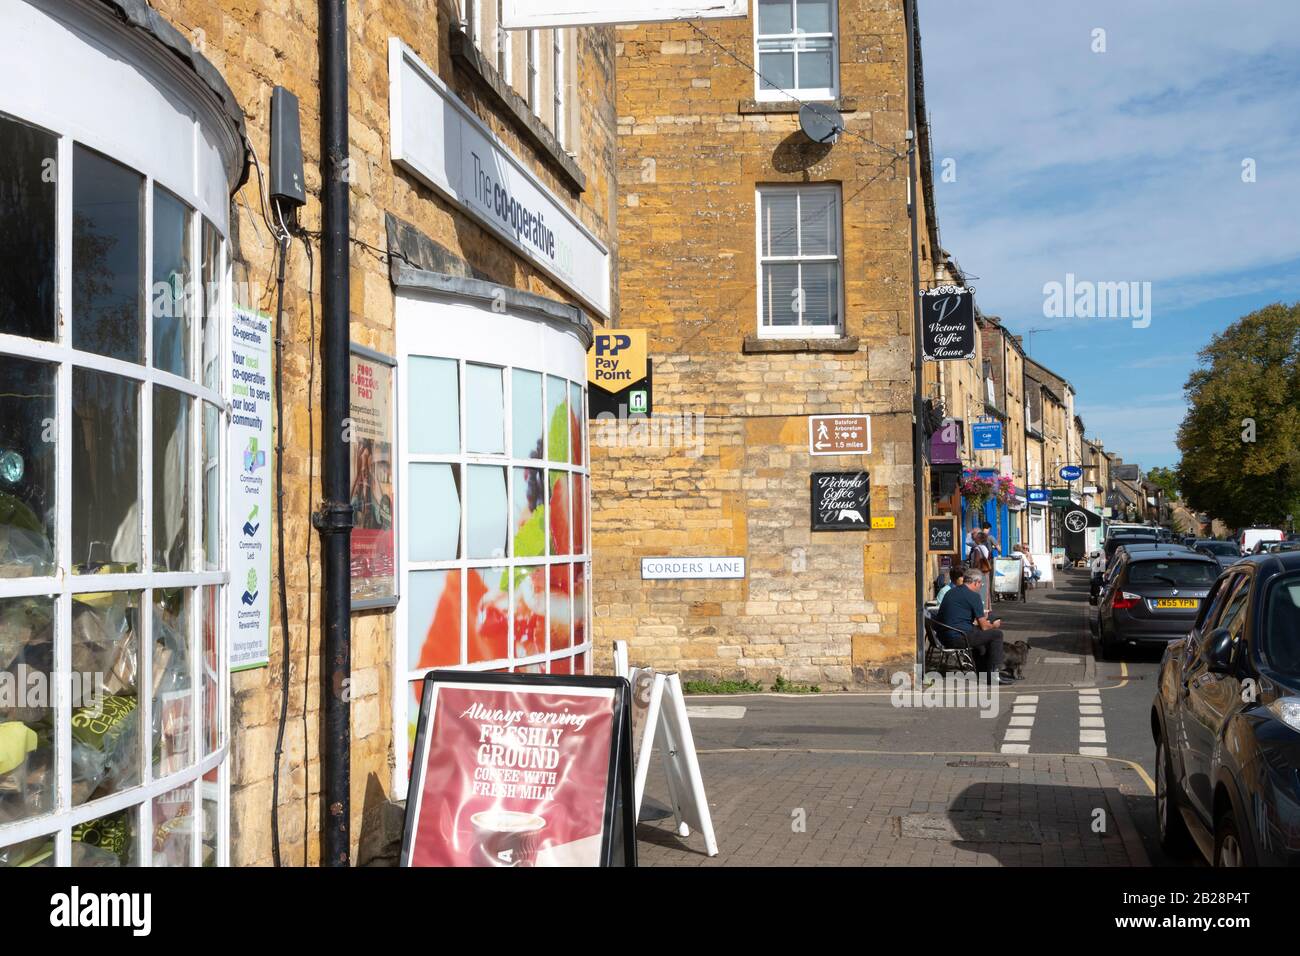 Shops in High Street, Moreton in the Marsh, Cotswolds, Gloucestershire, England Stock Photo